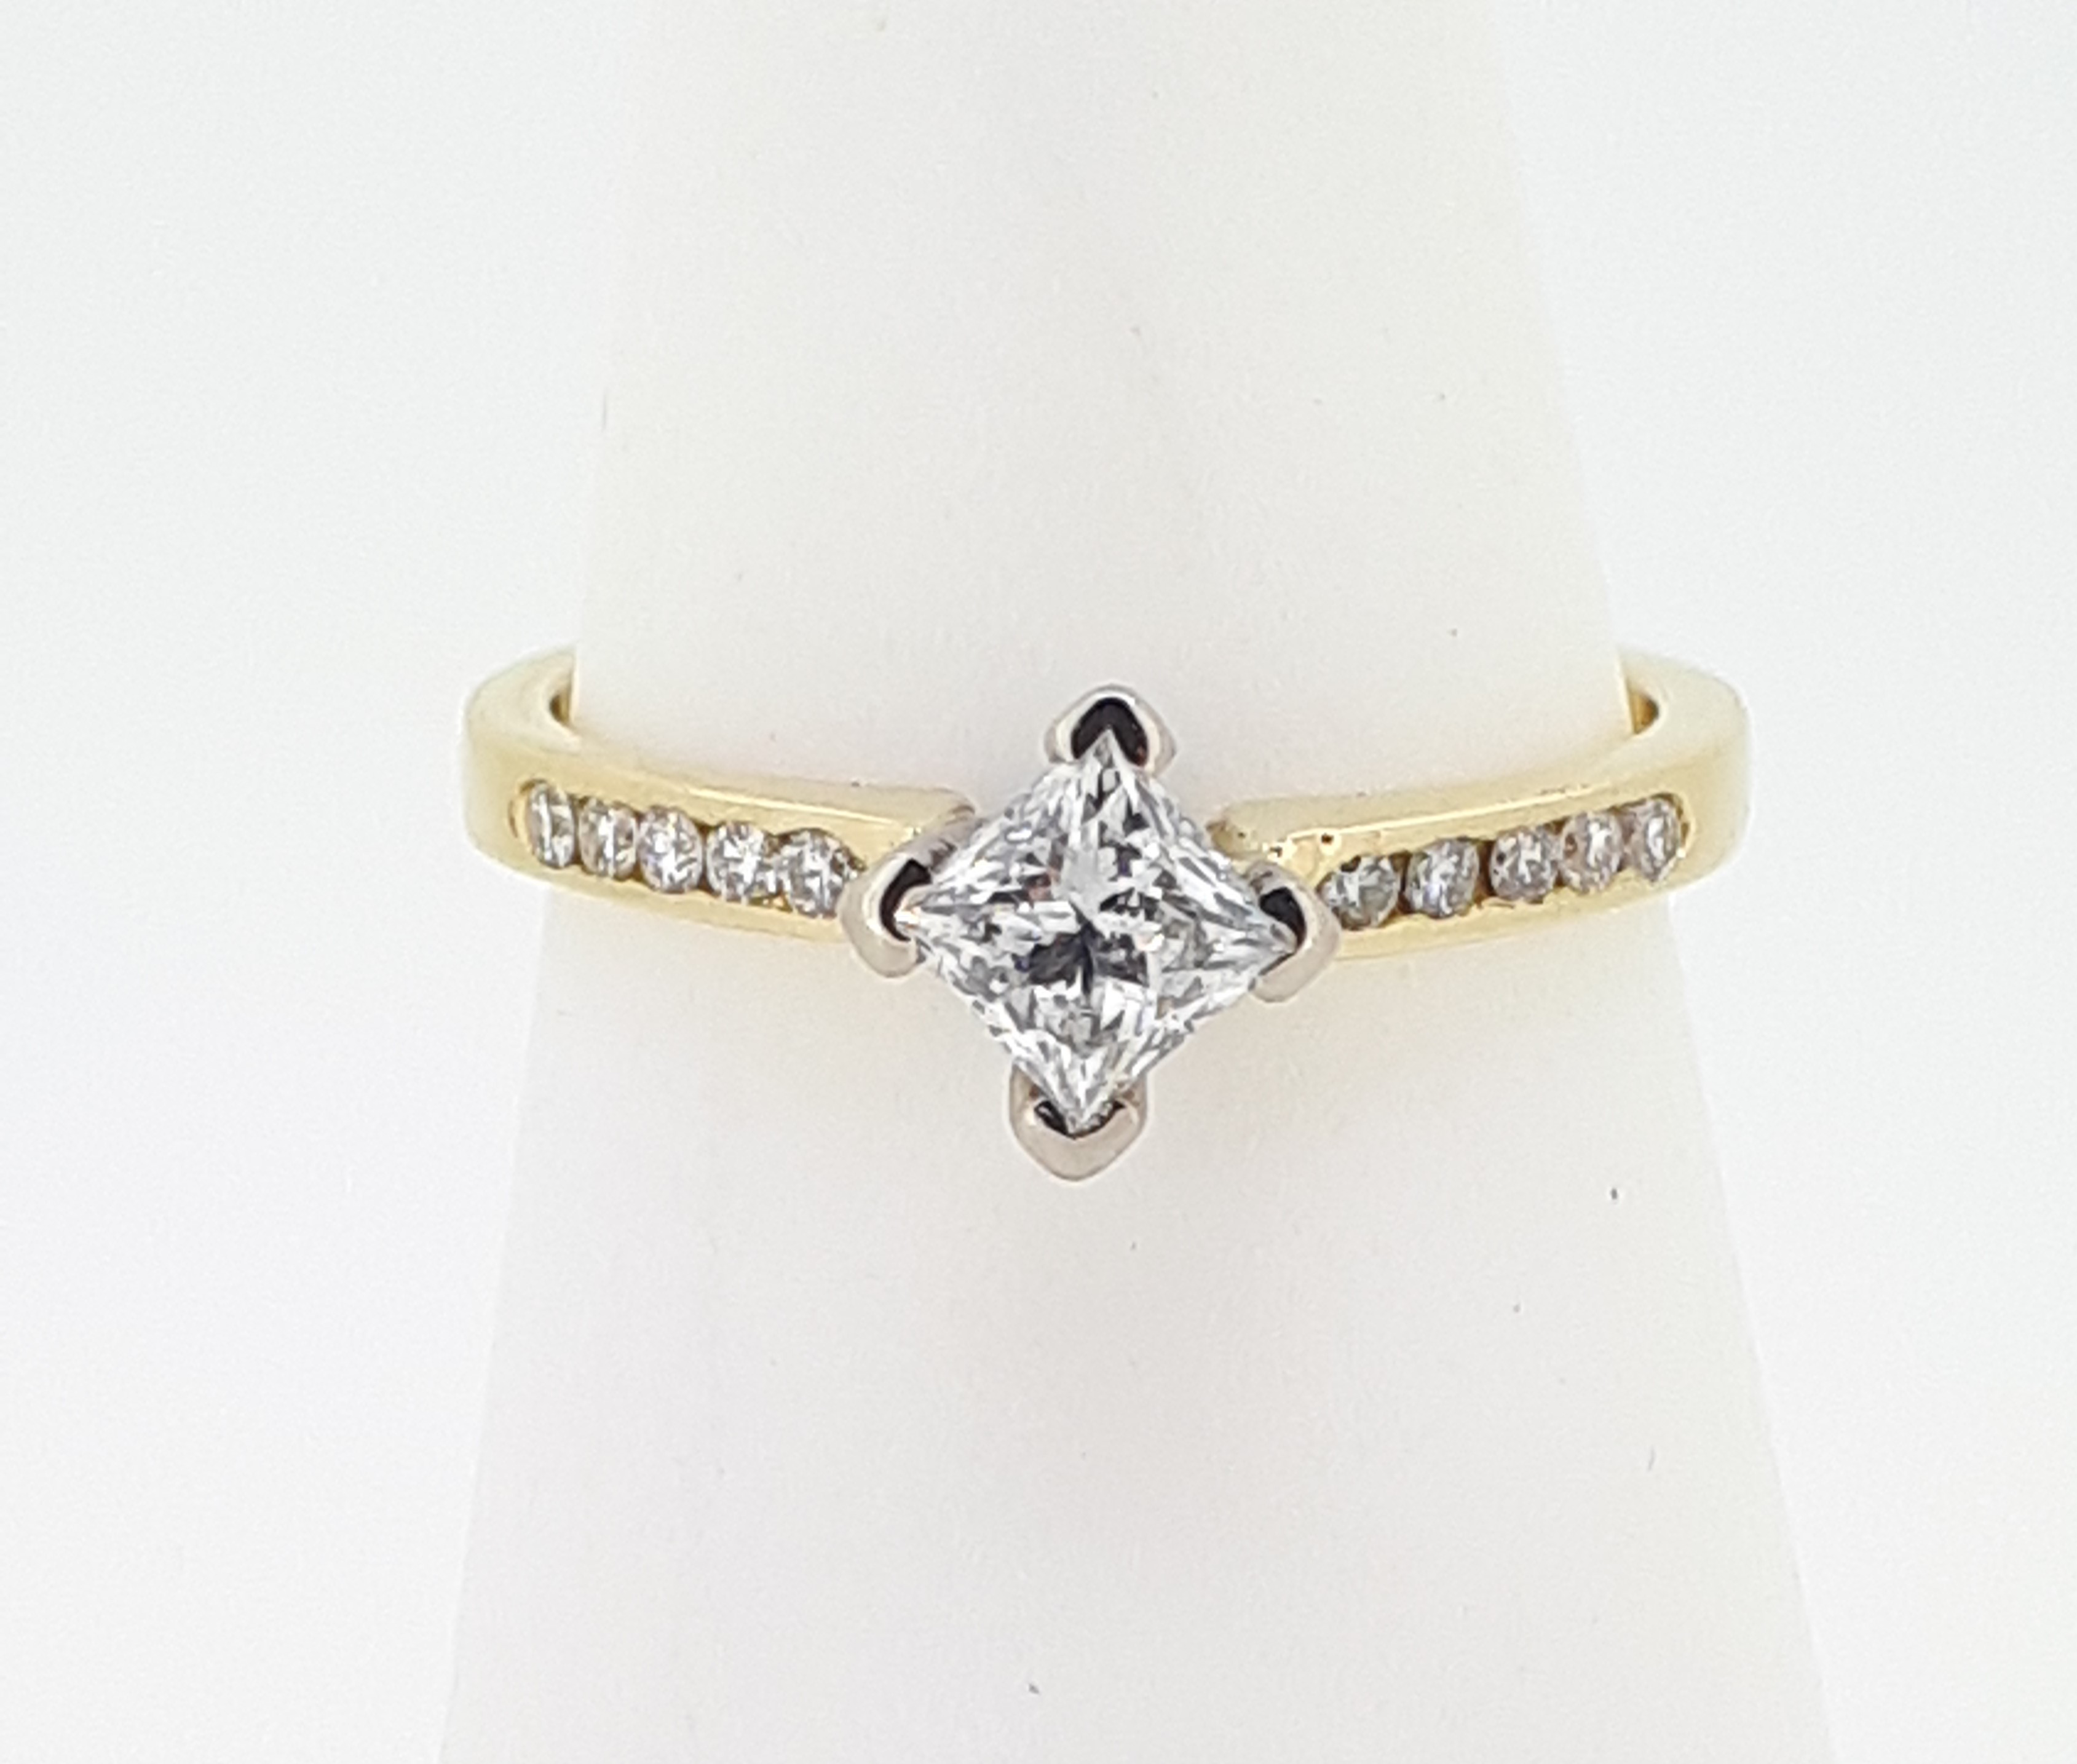 18ct (750) Yellow Gold Princess Cut 0.5ct Diamond Ring with Diamond Shoulders - Image 2 of 10